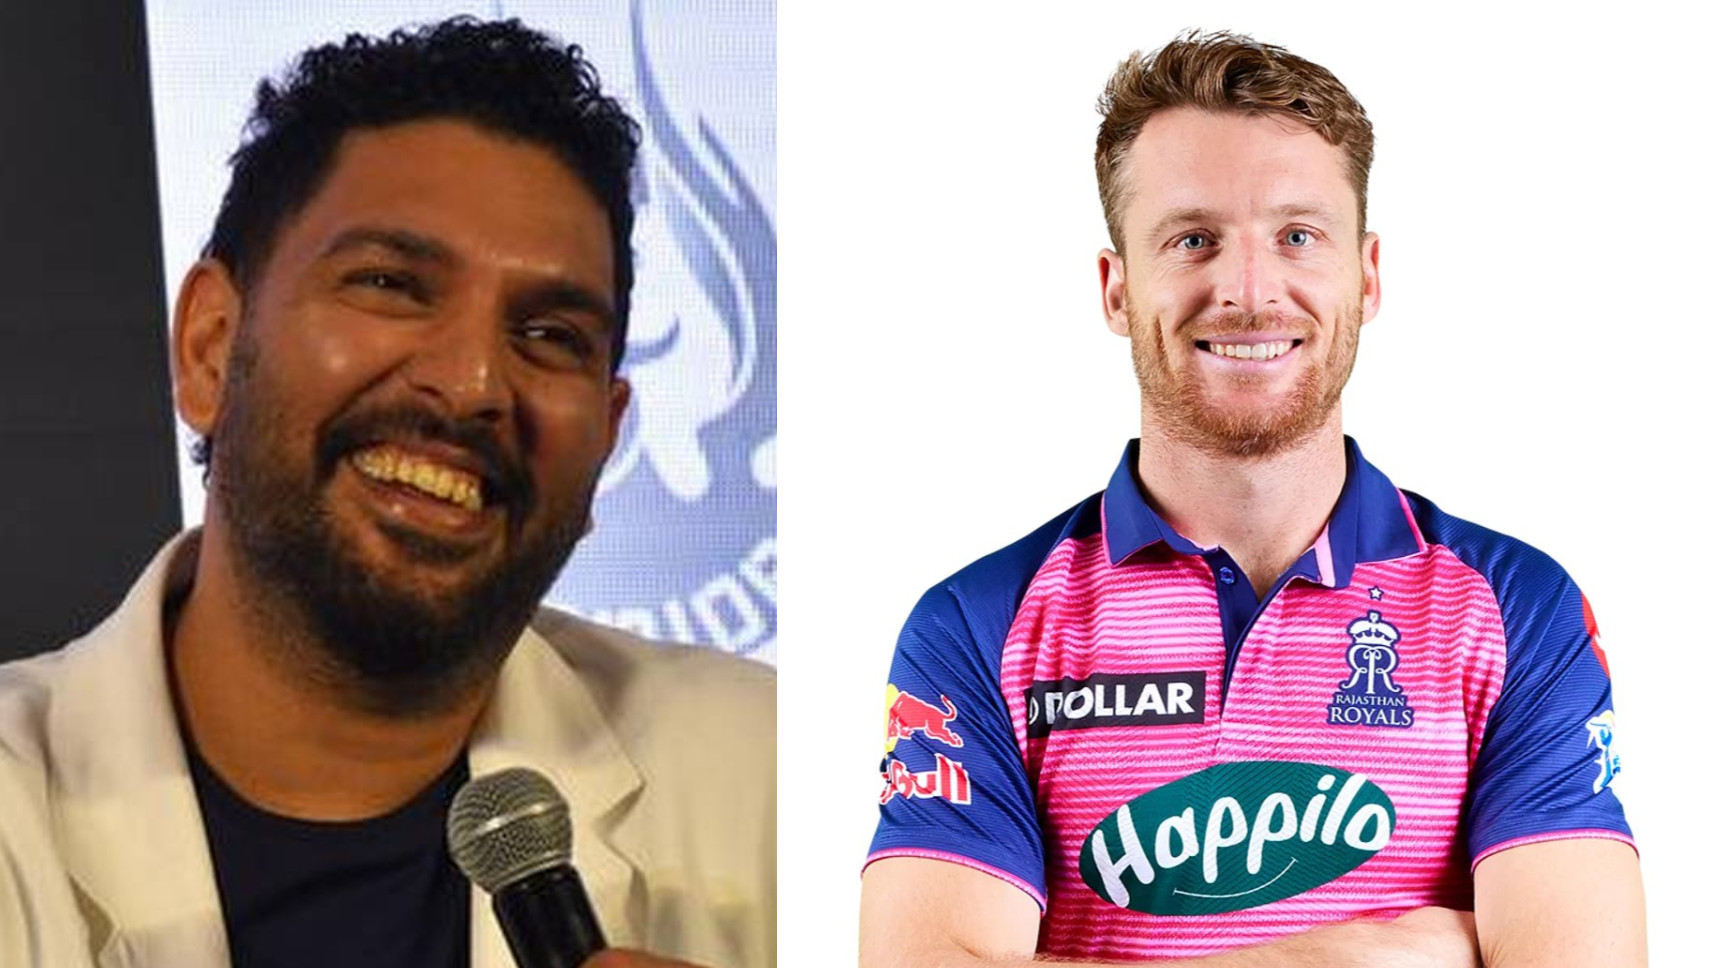 IPL 2022: His teammates should learn from him - Yuvraj raises Buttler for his gentlemanly conduct; fans react